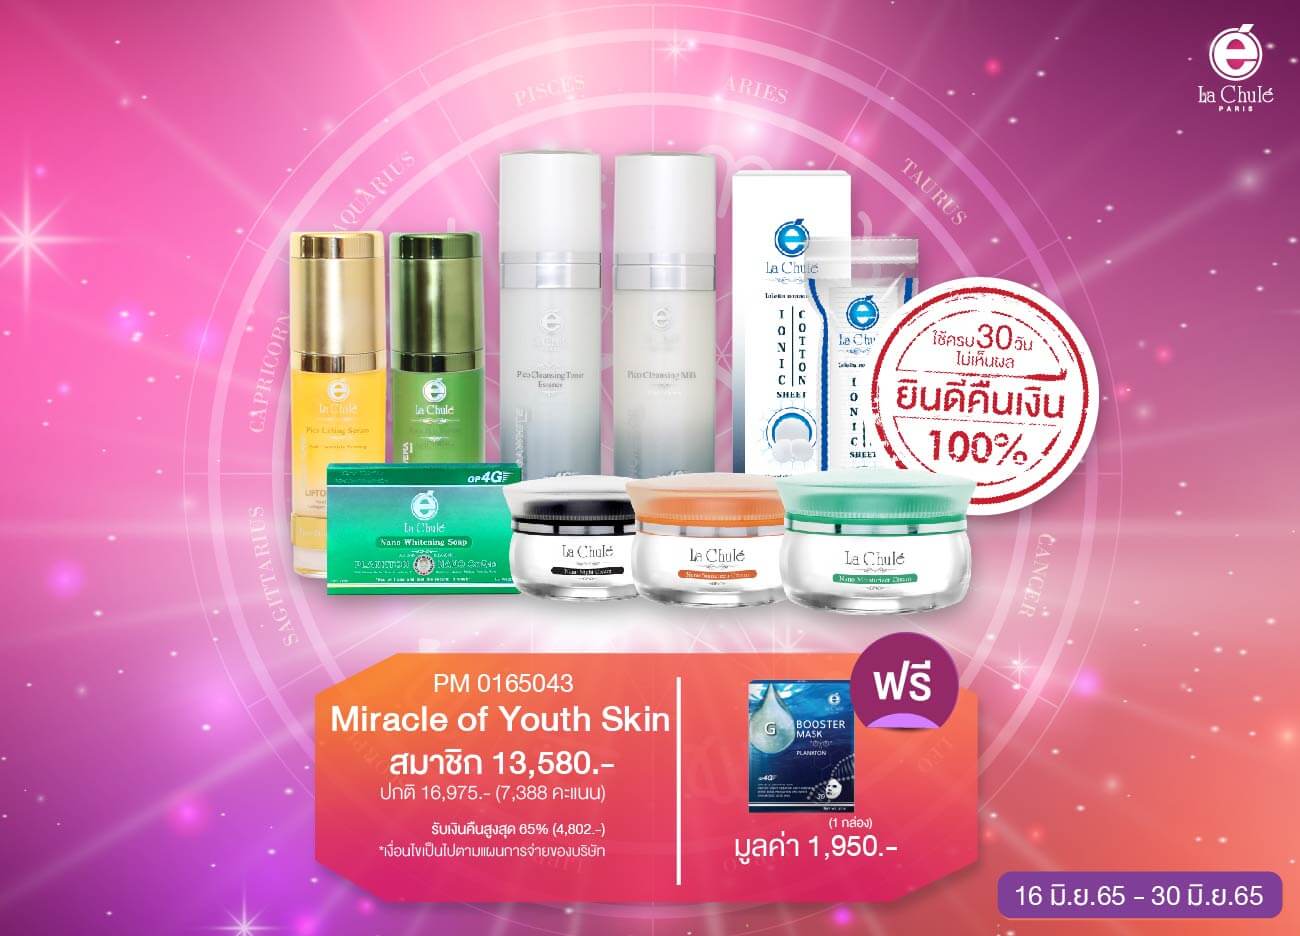 Miracle of Youth Skin